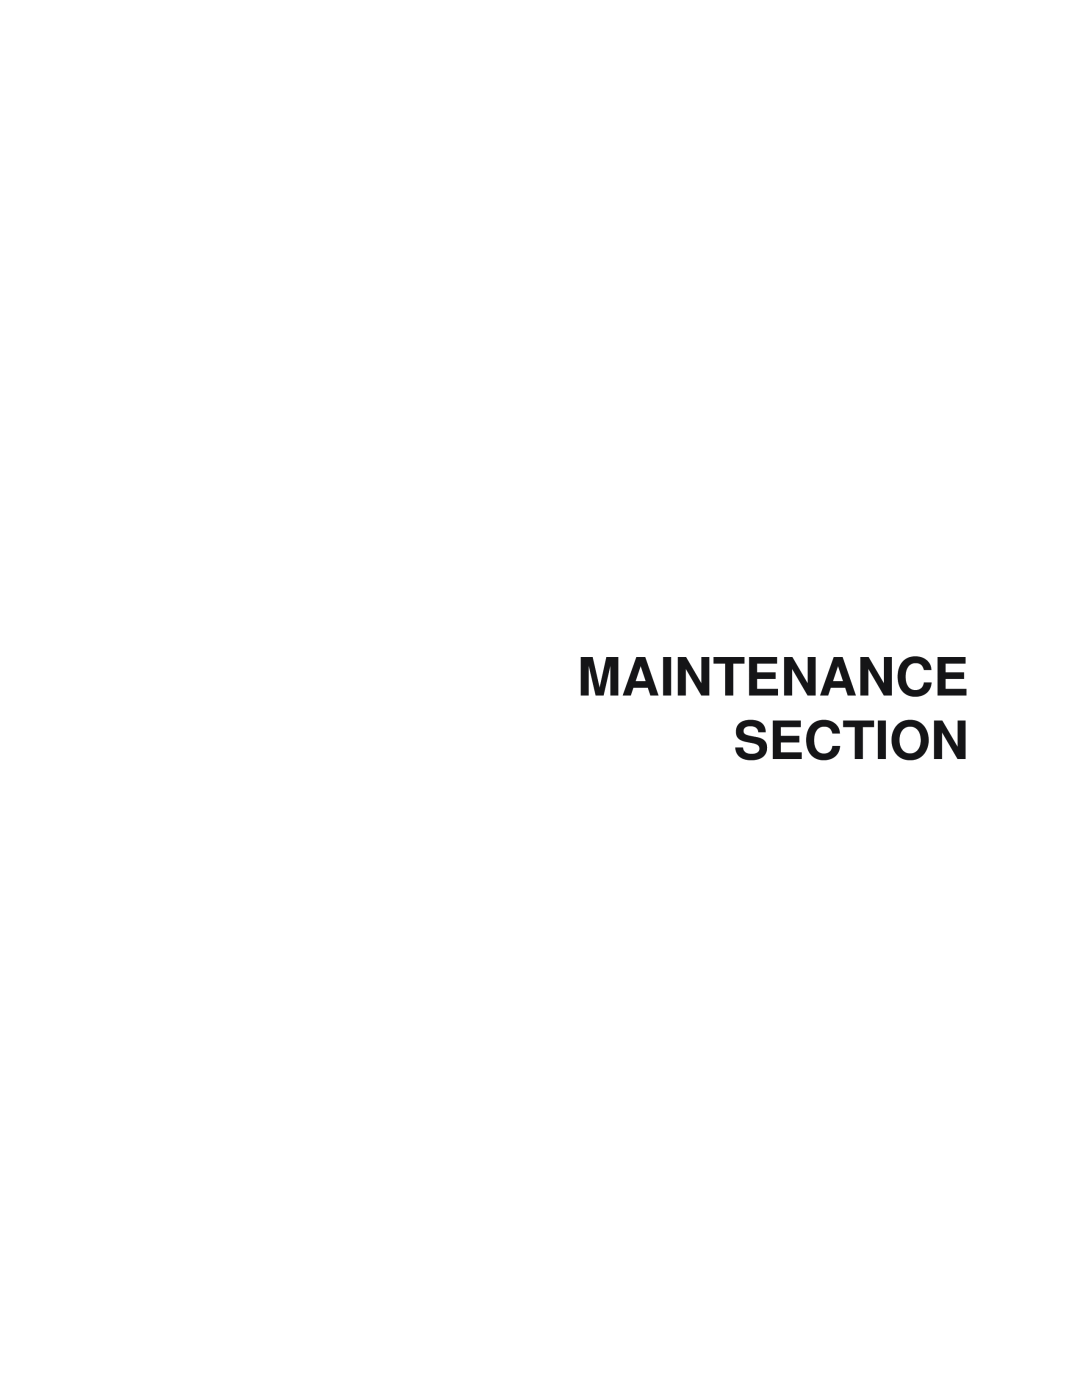 Tiger Products Co., Ltd TWR-120, TWR-180 manual Maintenance Section 